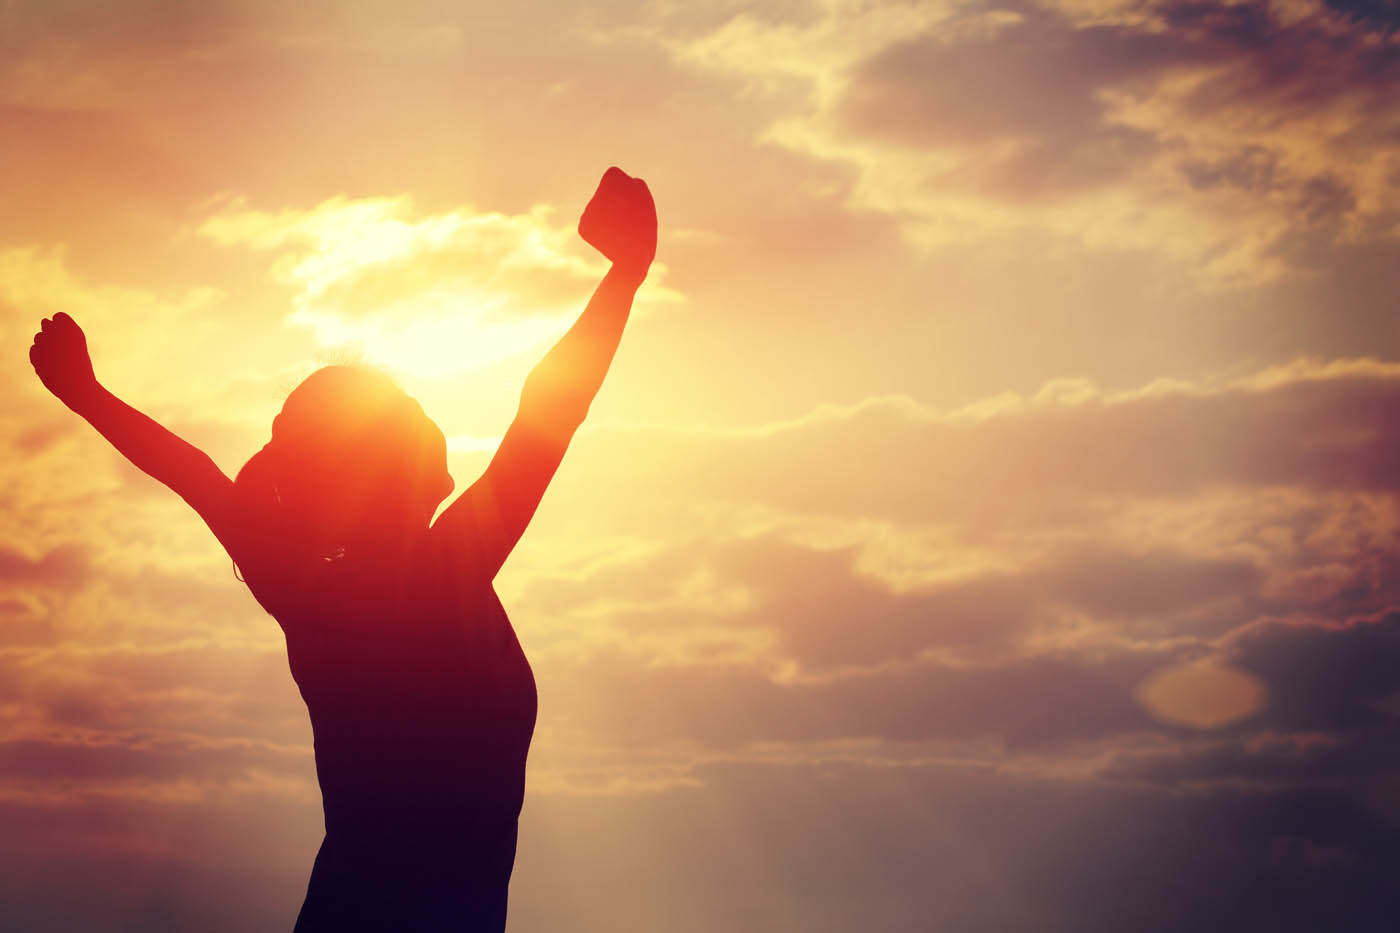 A woman standing in the light with her arms up in the air - learn how you can get relief with Light Lounge's back pain management in Lehi, UT.